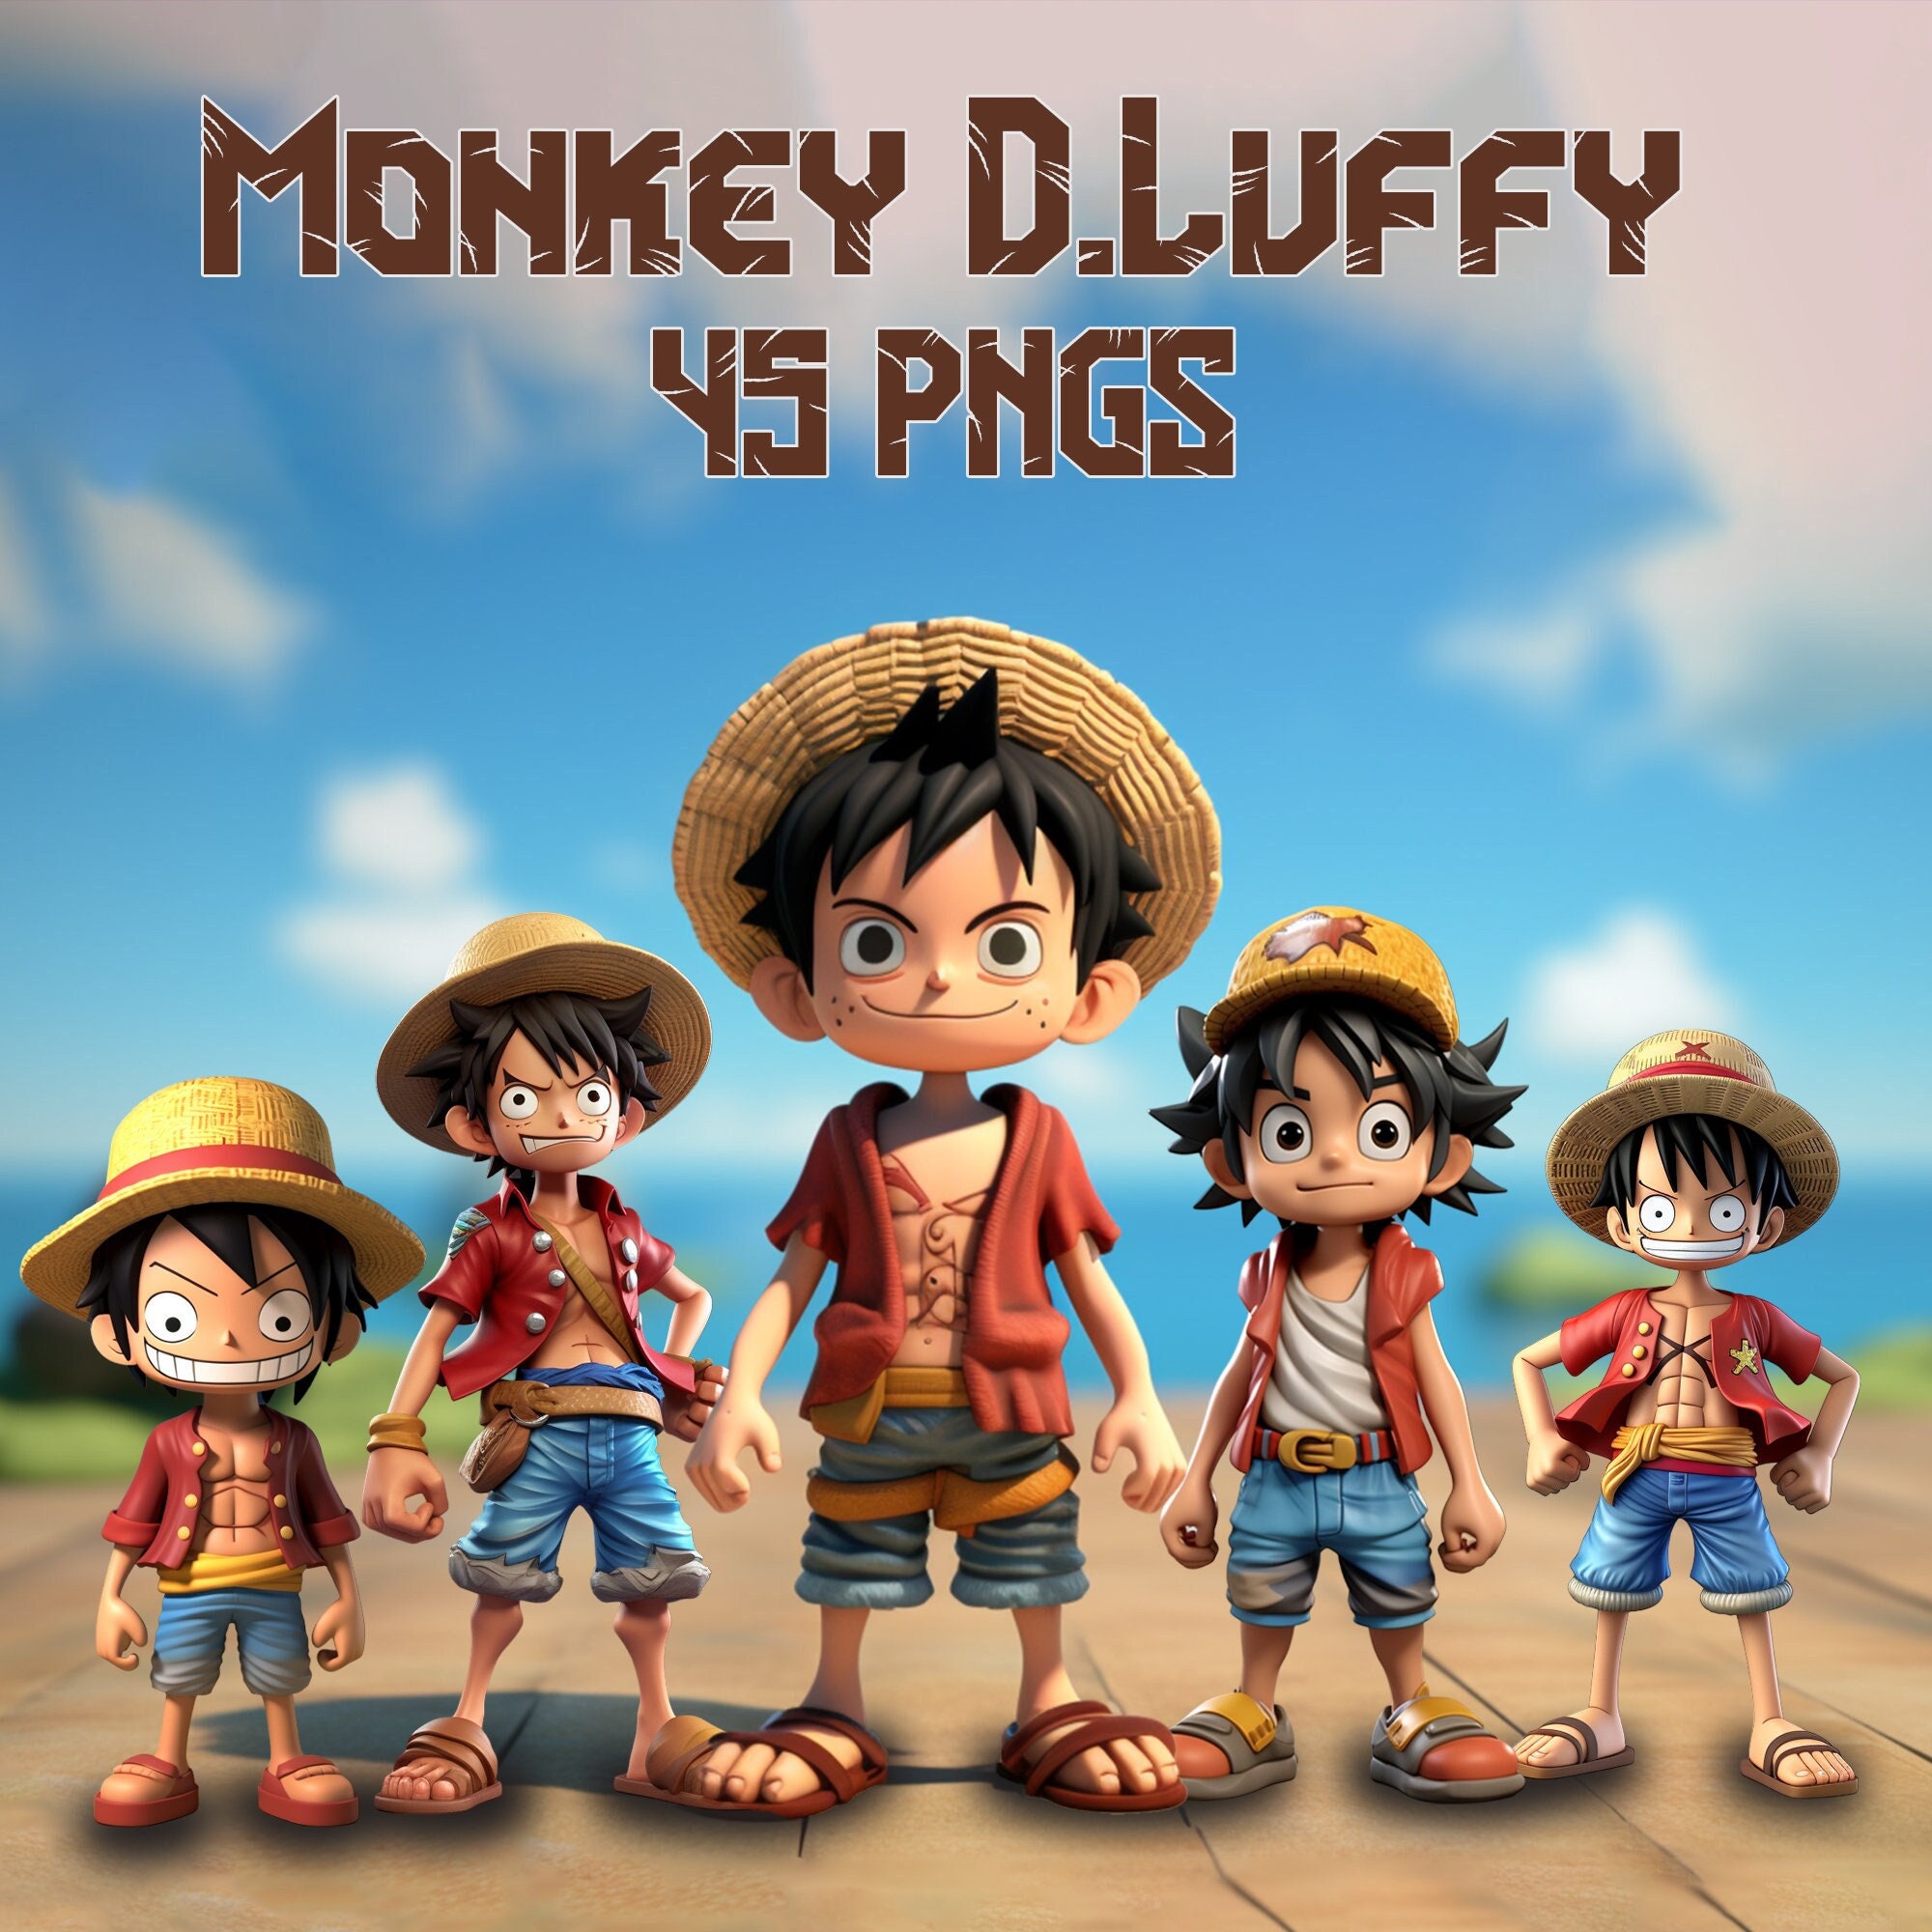 Monkey D Luffy from One Piece illustration, Monkey D. Luffy Roronoa Zoro  Nami T-shirt One Piece, Monkey D Luffy, fictional Characters, fashion png